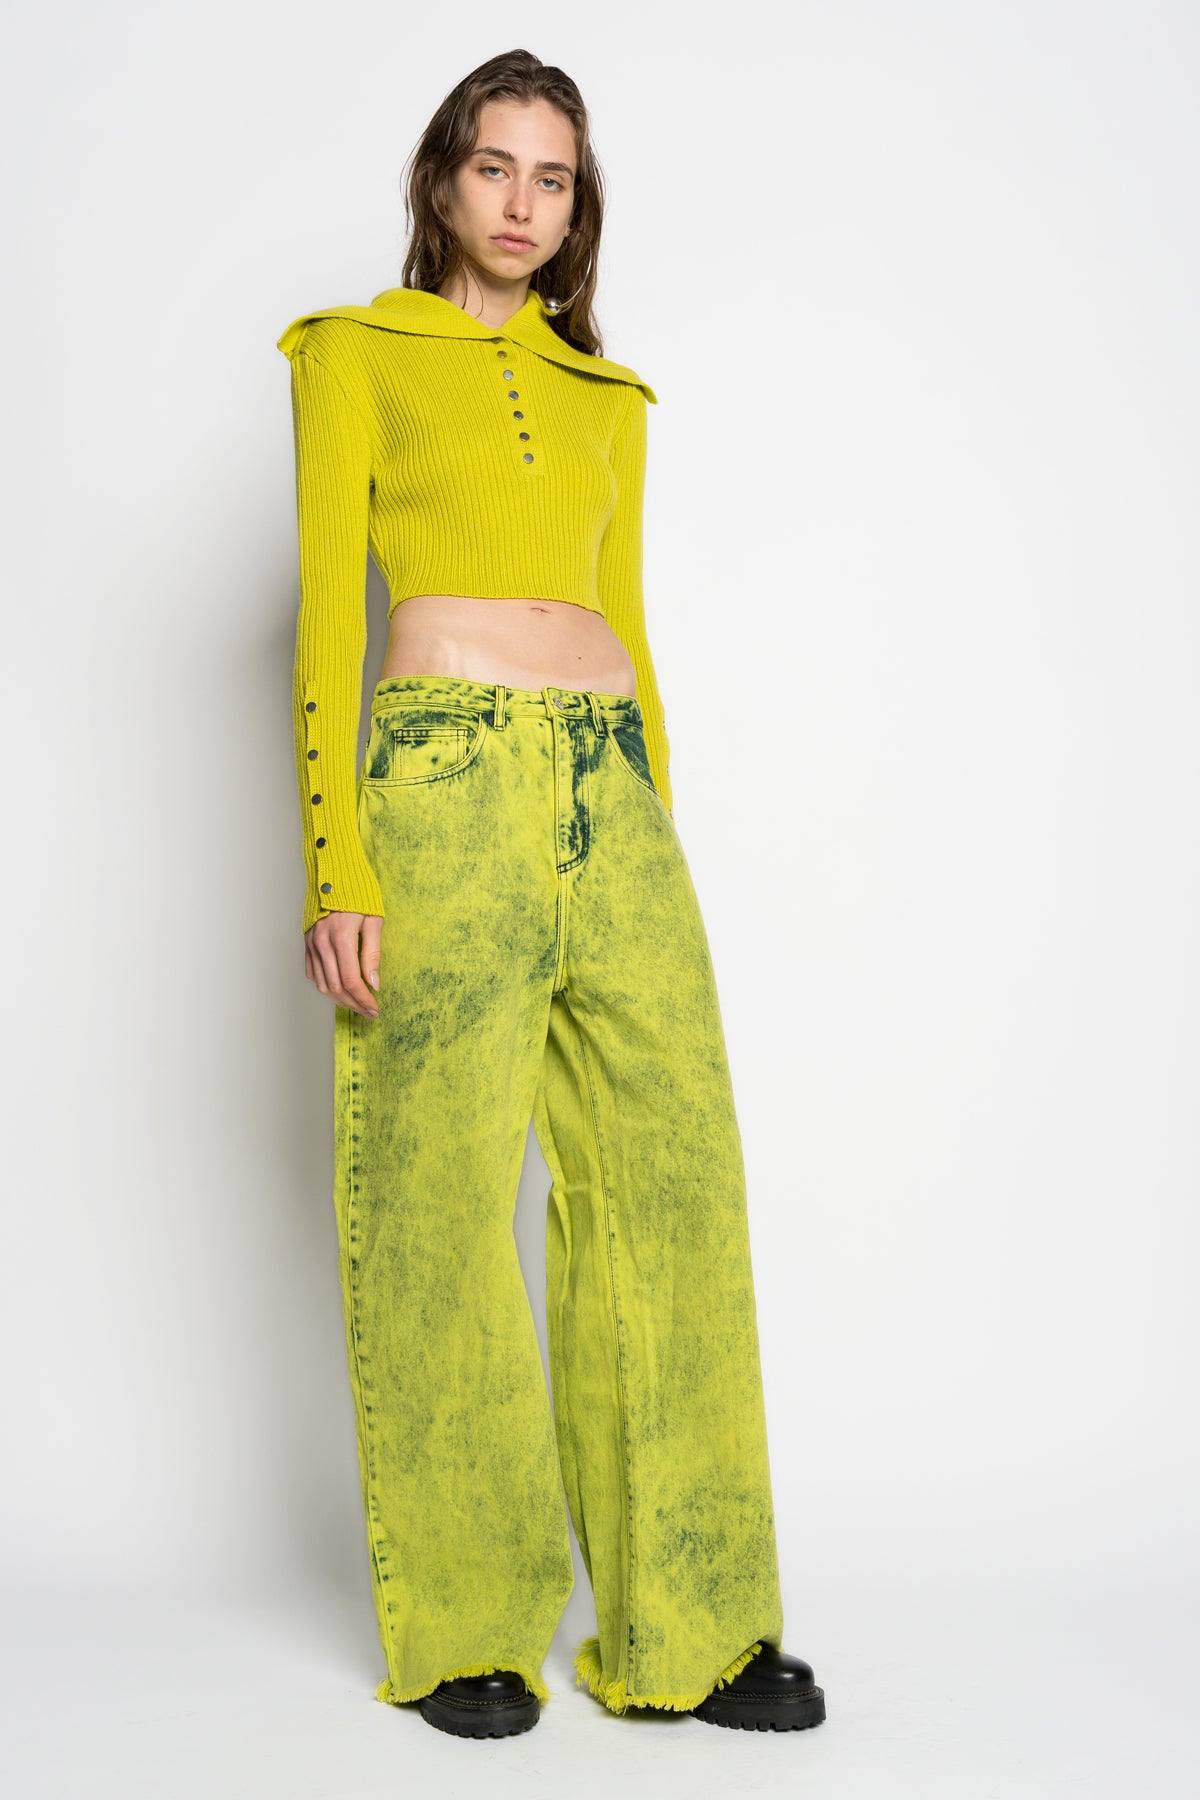 LIME MERINO WOOL KNITTED CROPPED TOP WITH BIG COLLAR marques almeida